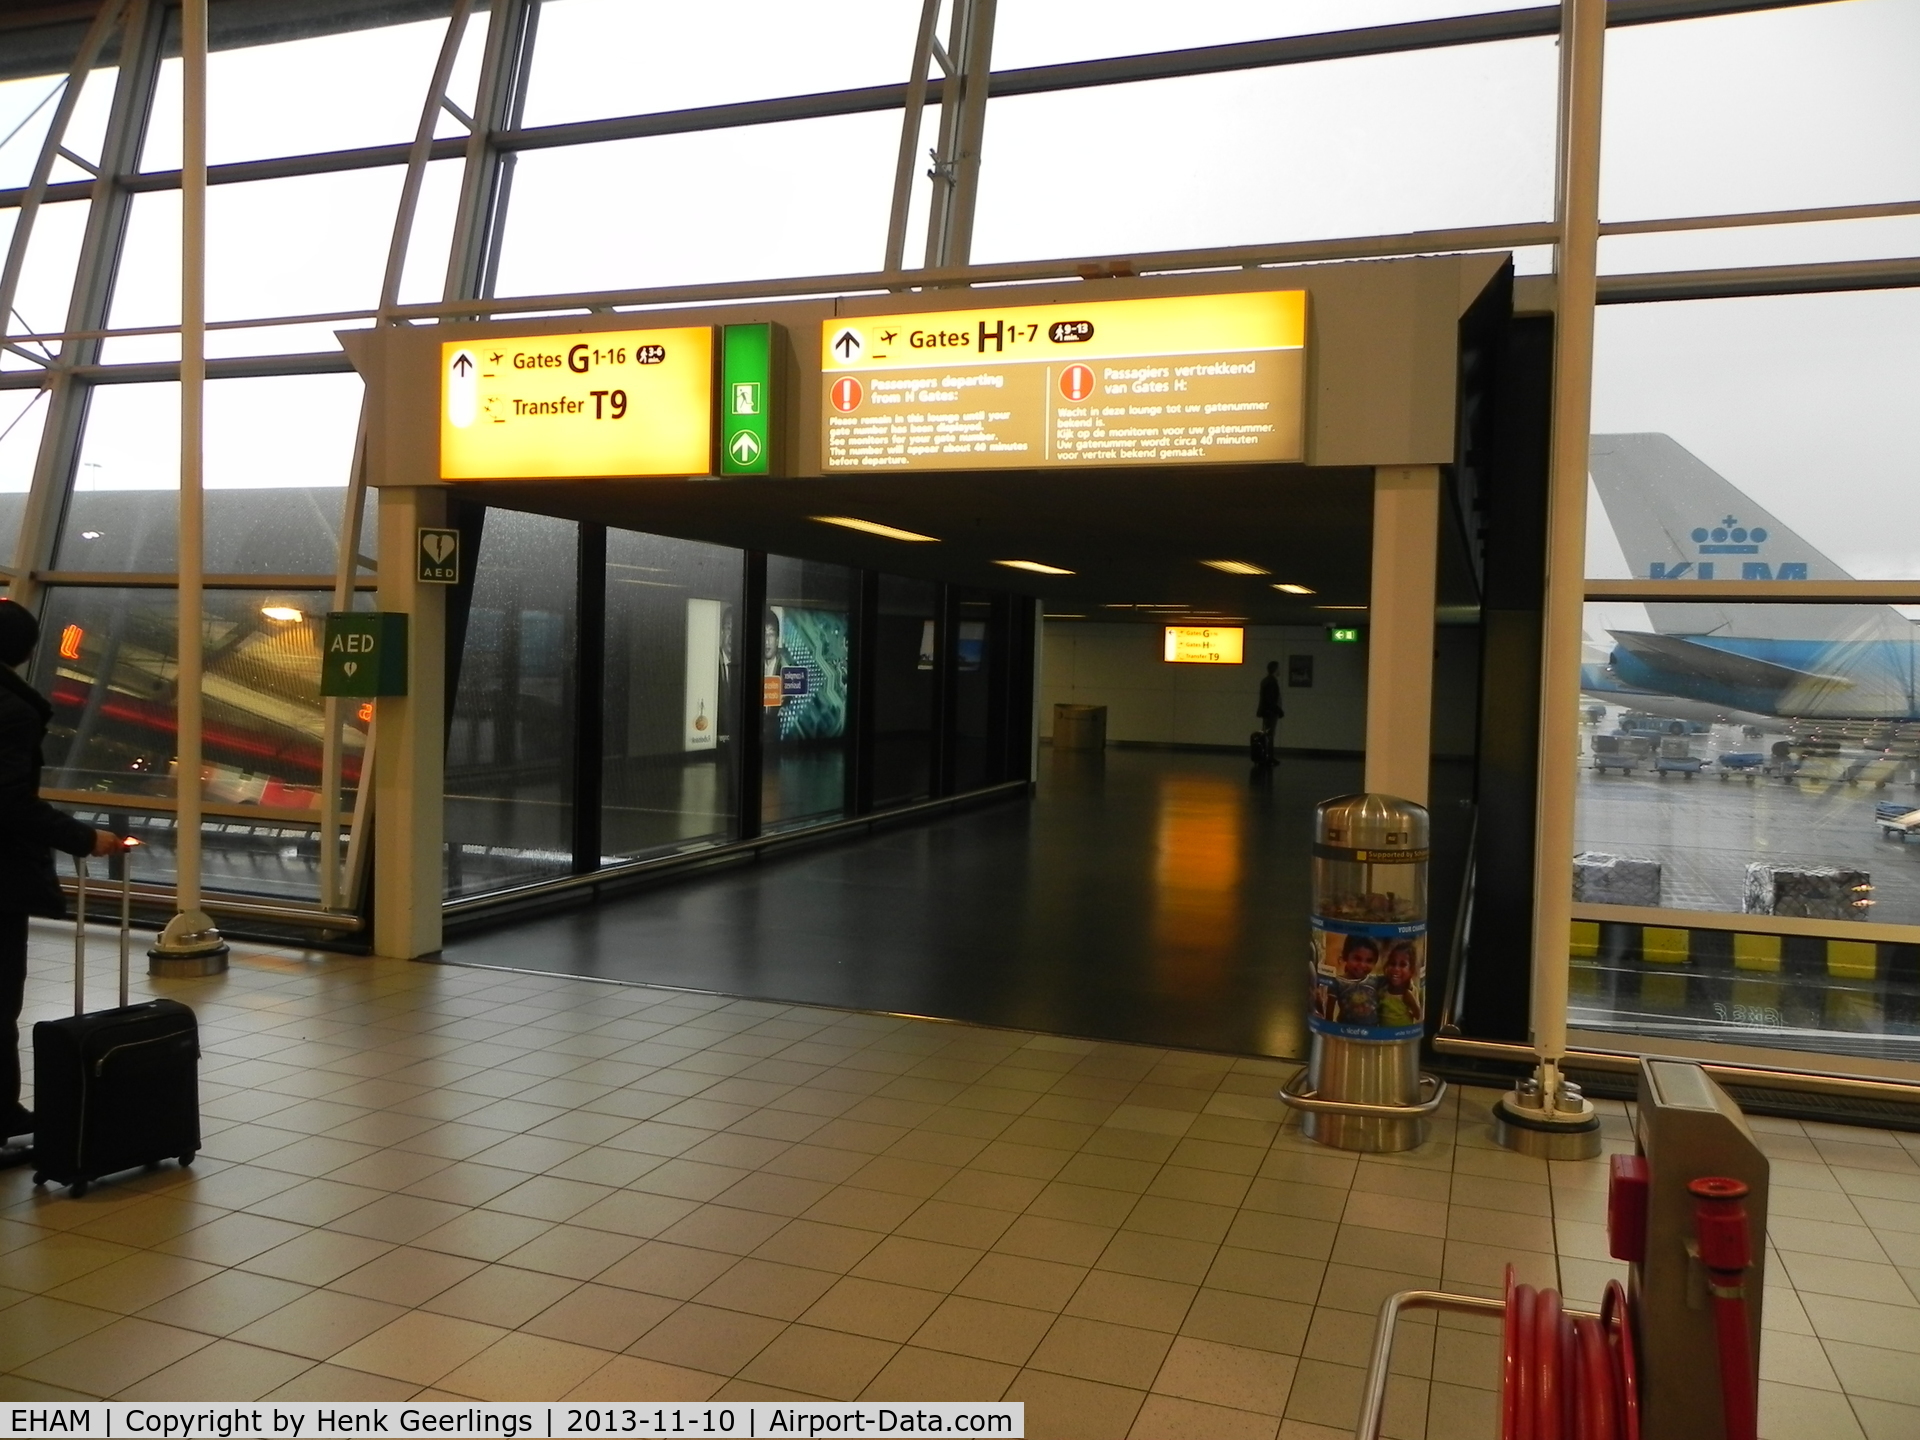 Amsterdam Schiphol Airport, Haarlemmermeer, near Amsterdam Netherlands (EHAM) - Entrance to H-Gates , Low cost airlines 